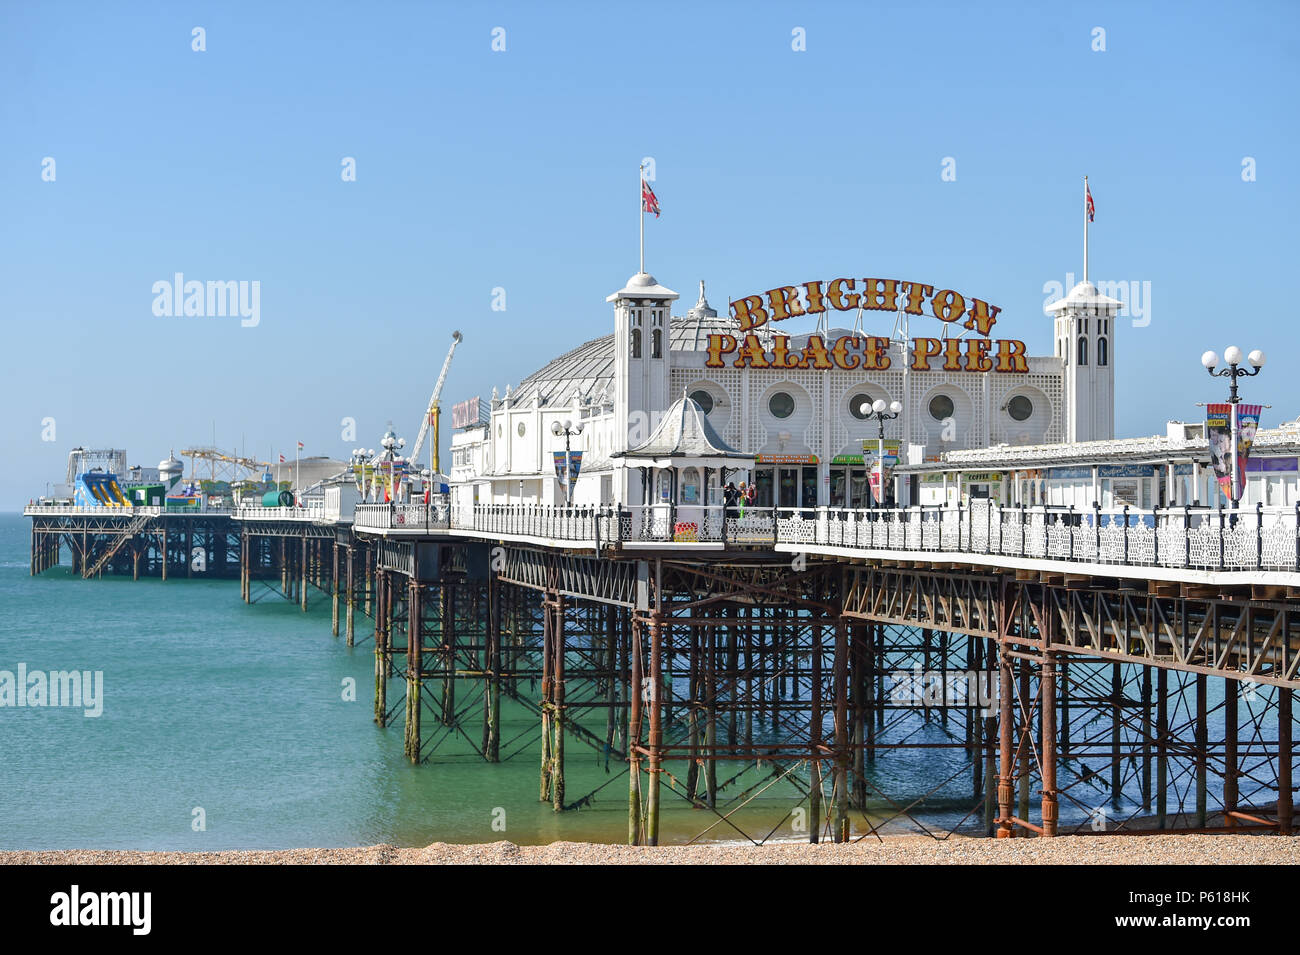 Brighton UK 28th June 2018 - Brighton Palace Pier showing off its new neon sign today after changing its name from Brighton Pier . The pier was built in the 1890s and named Brighton Marine Palace  and Pier but became known locally  as the Palace Pier until 2000 when it was rebranded Brighton Pier. Luke Johnson executive chairman of the Brighton Pier Group has now announced that it will be known as Brighton Palace Pier Credit: Simon Dack/Alamy Live News Stock Photo